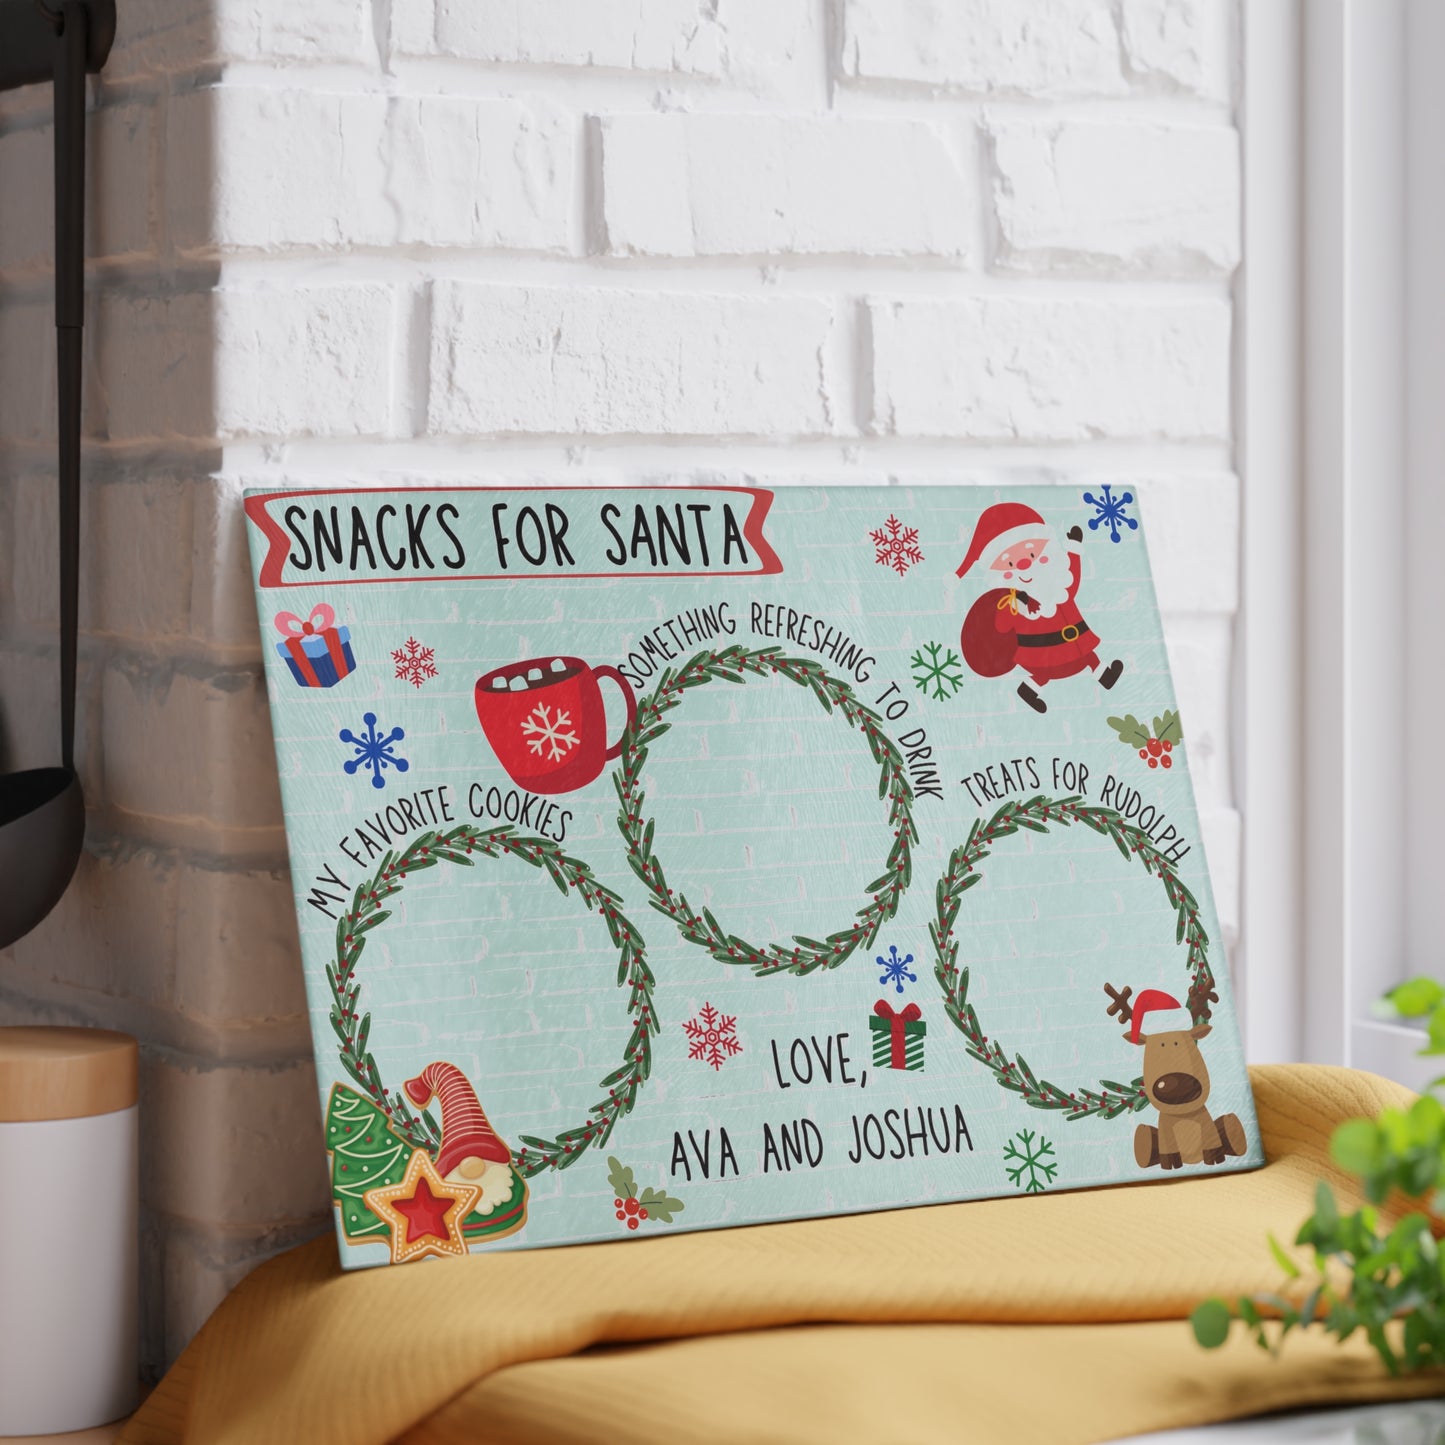 Snack for Santa Glass Cookie and Treat Board for Kids Gift Ideas for Christmas Santa Snack Tray